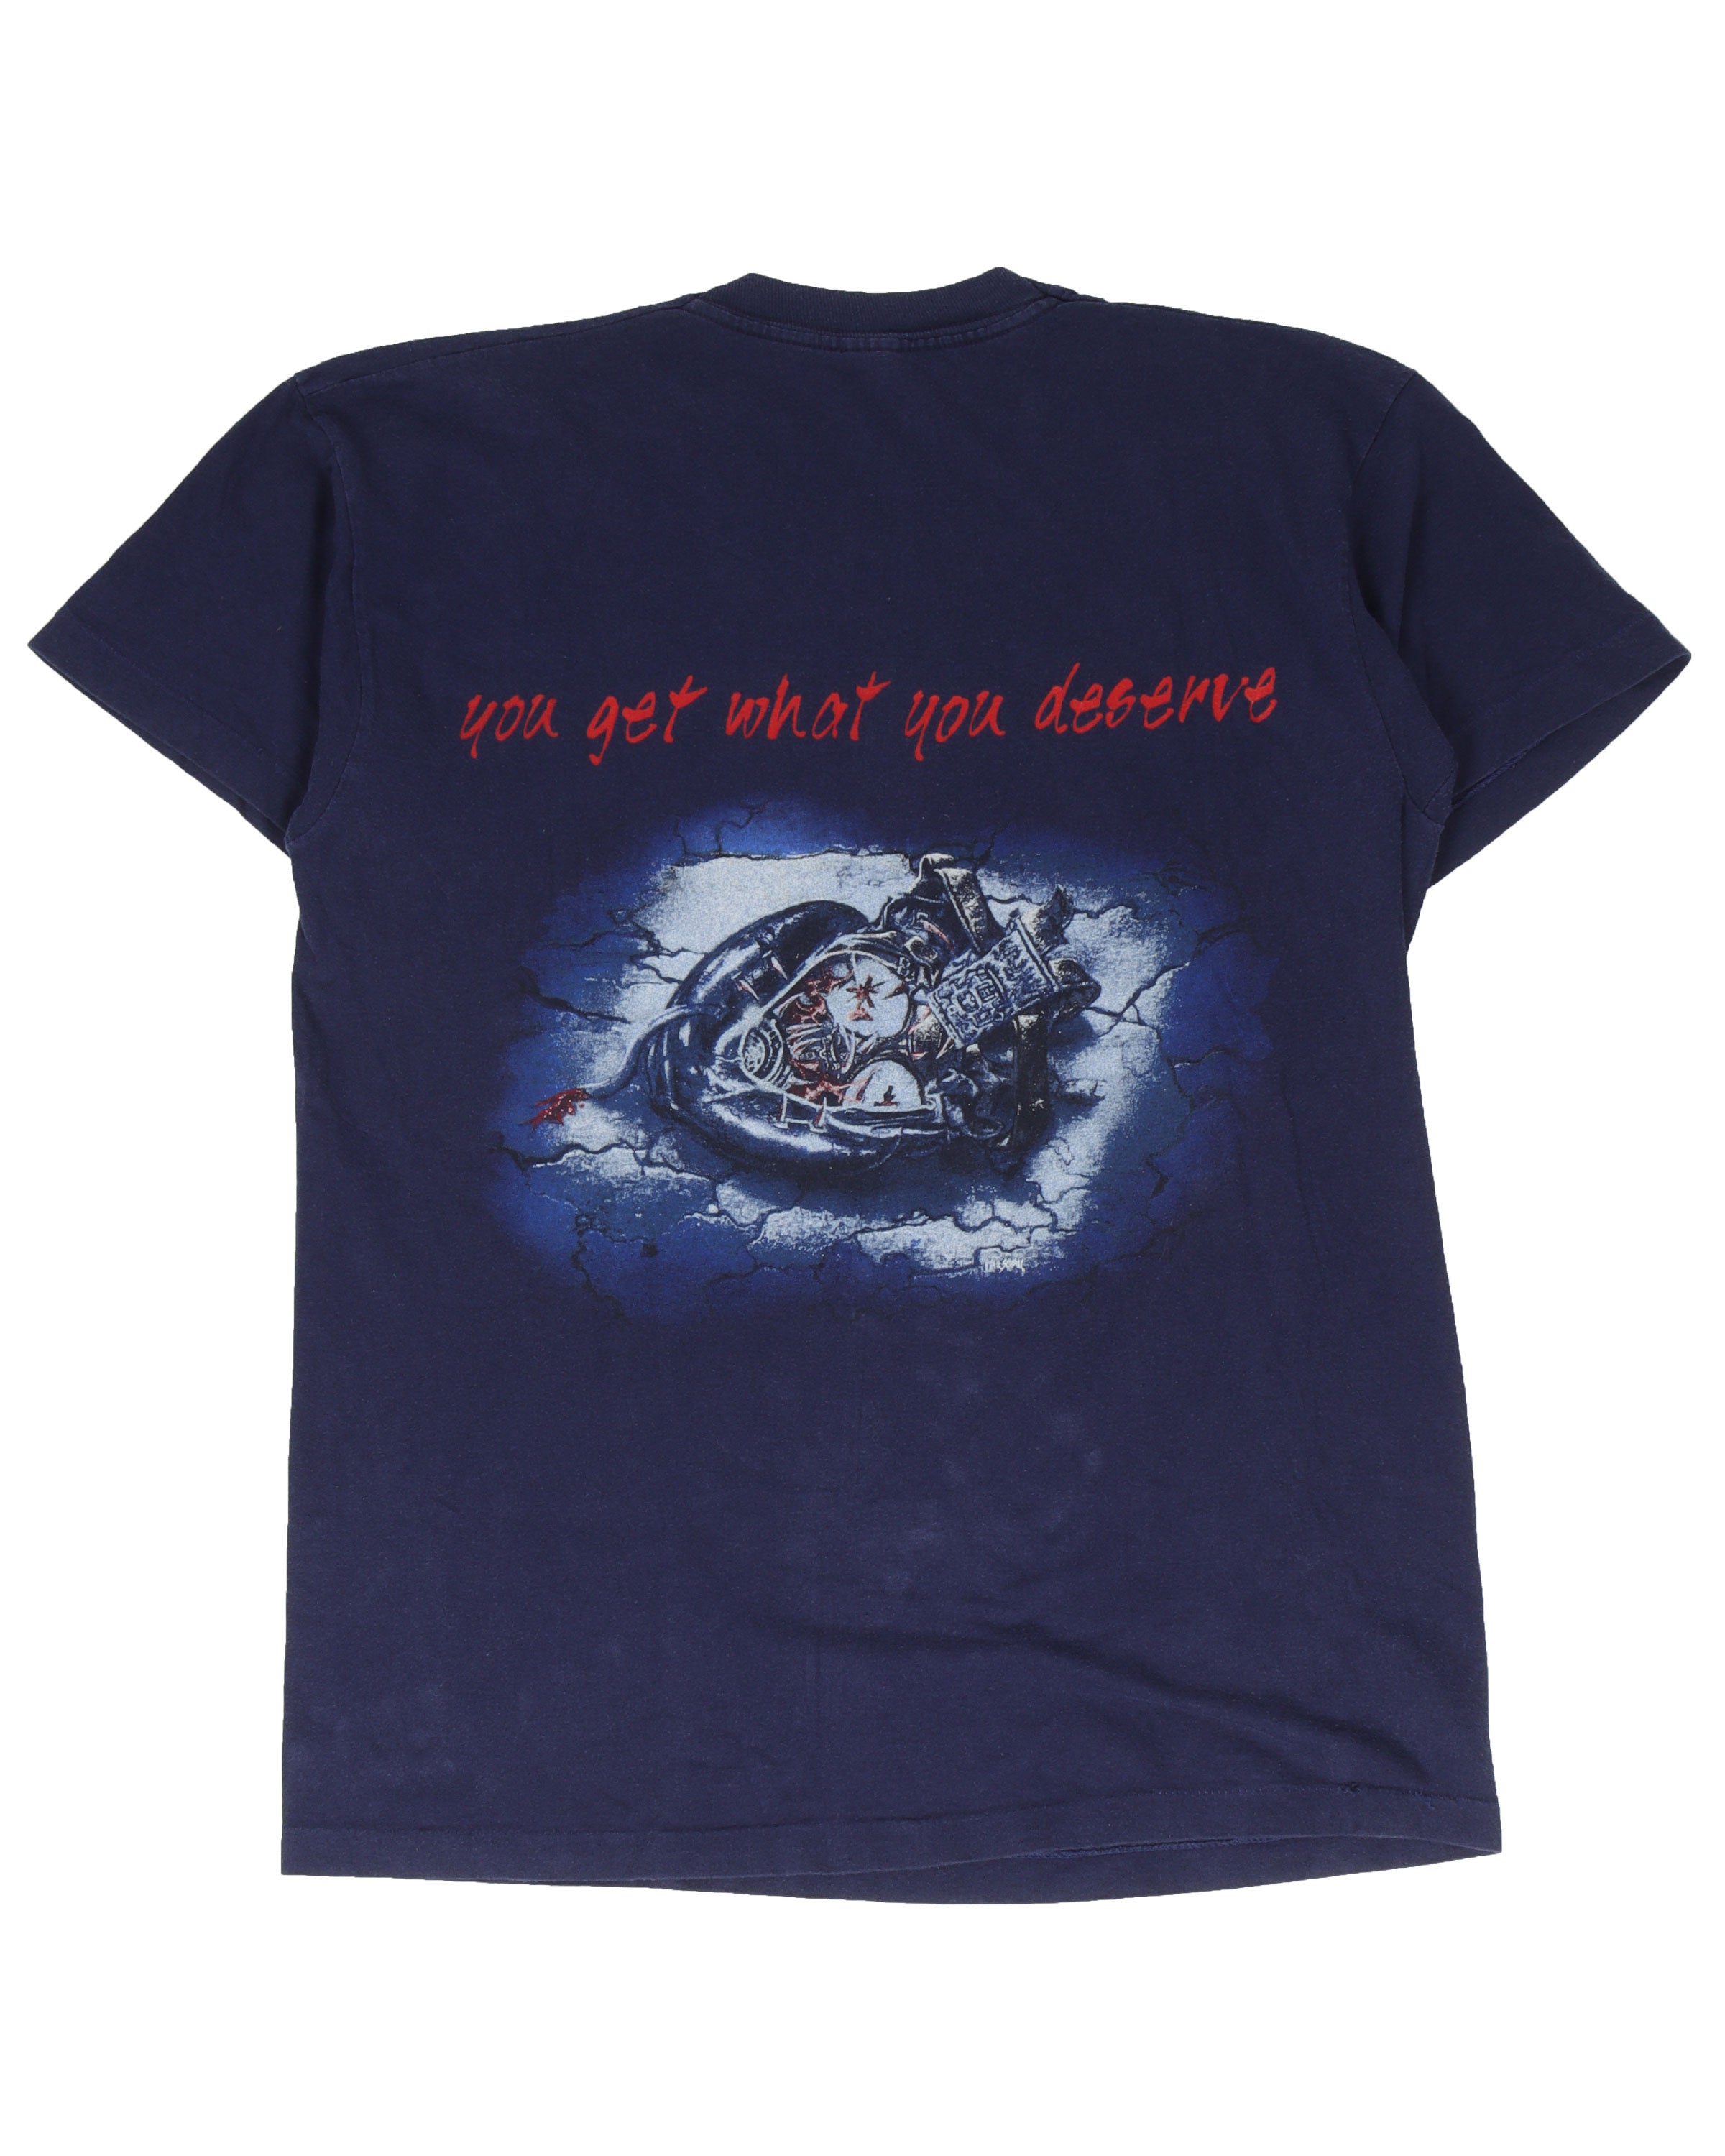 Sodom "You Get What You Deserve" T-Shirt